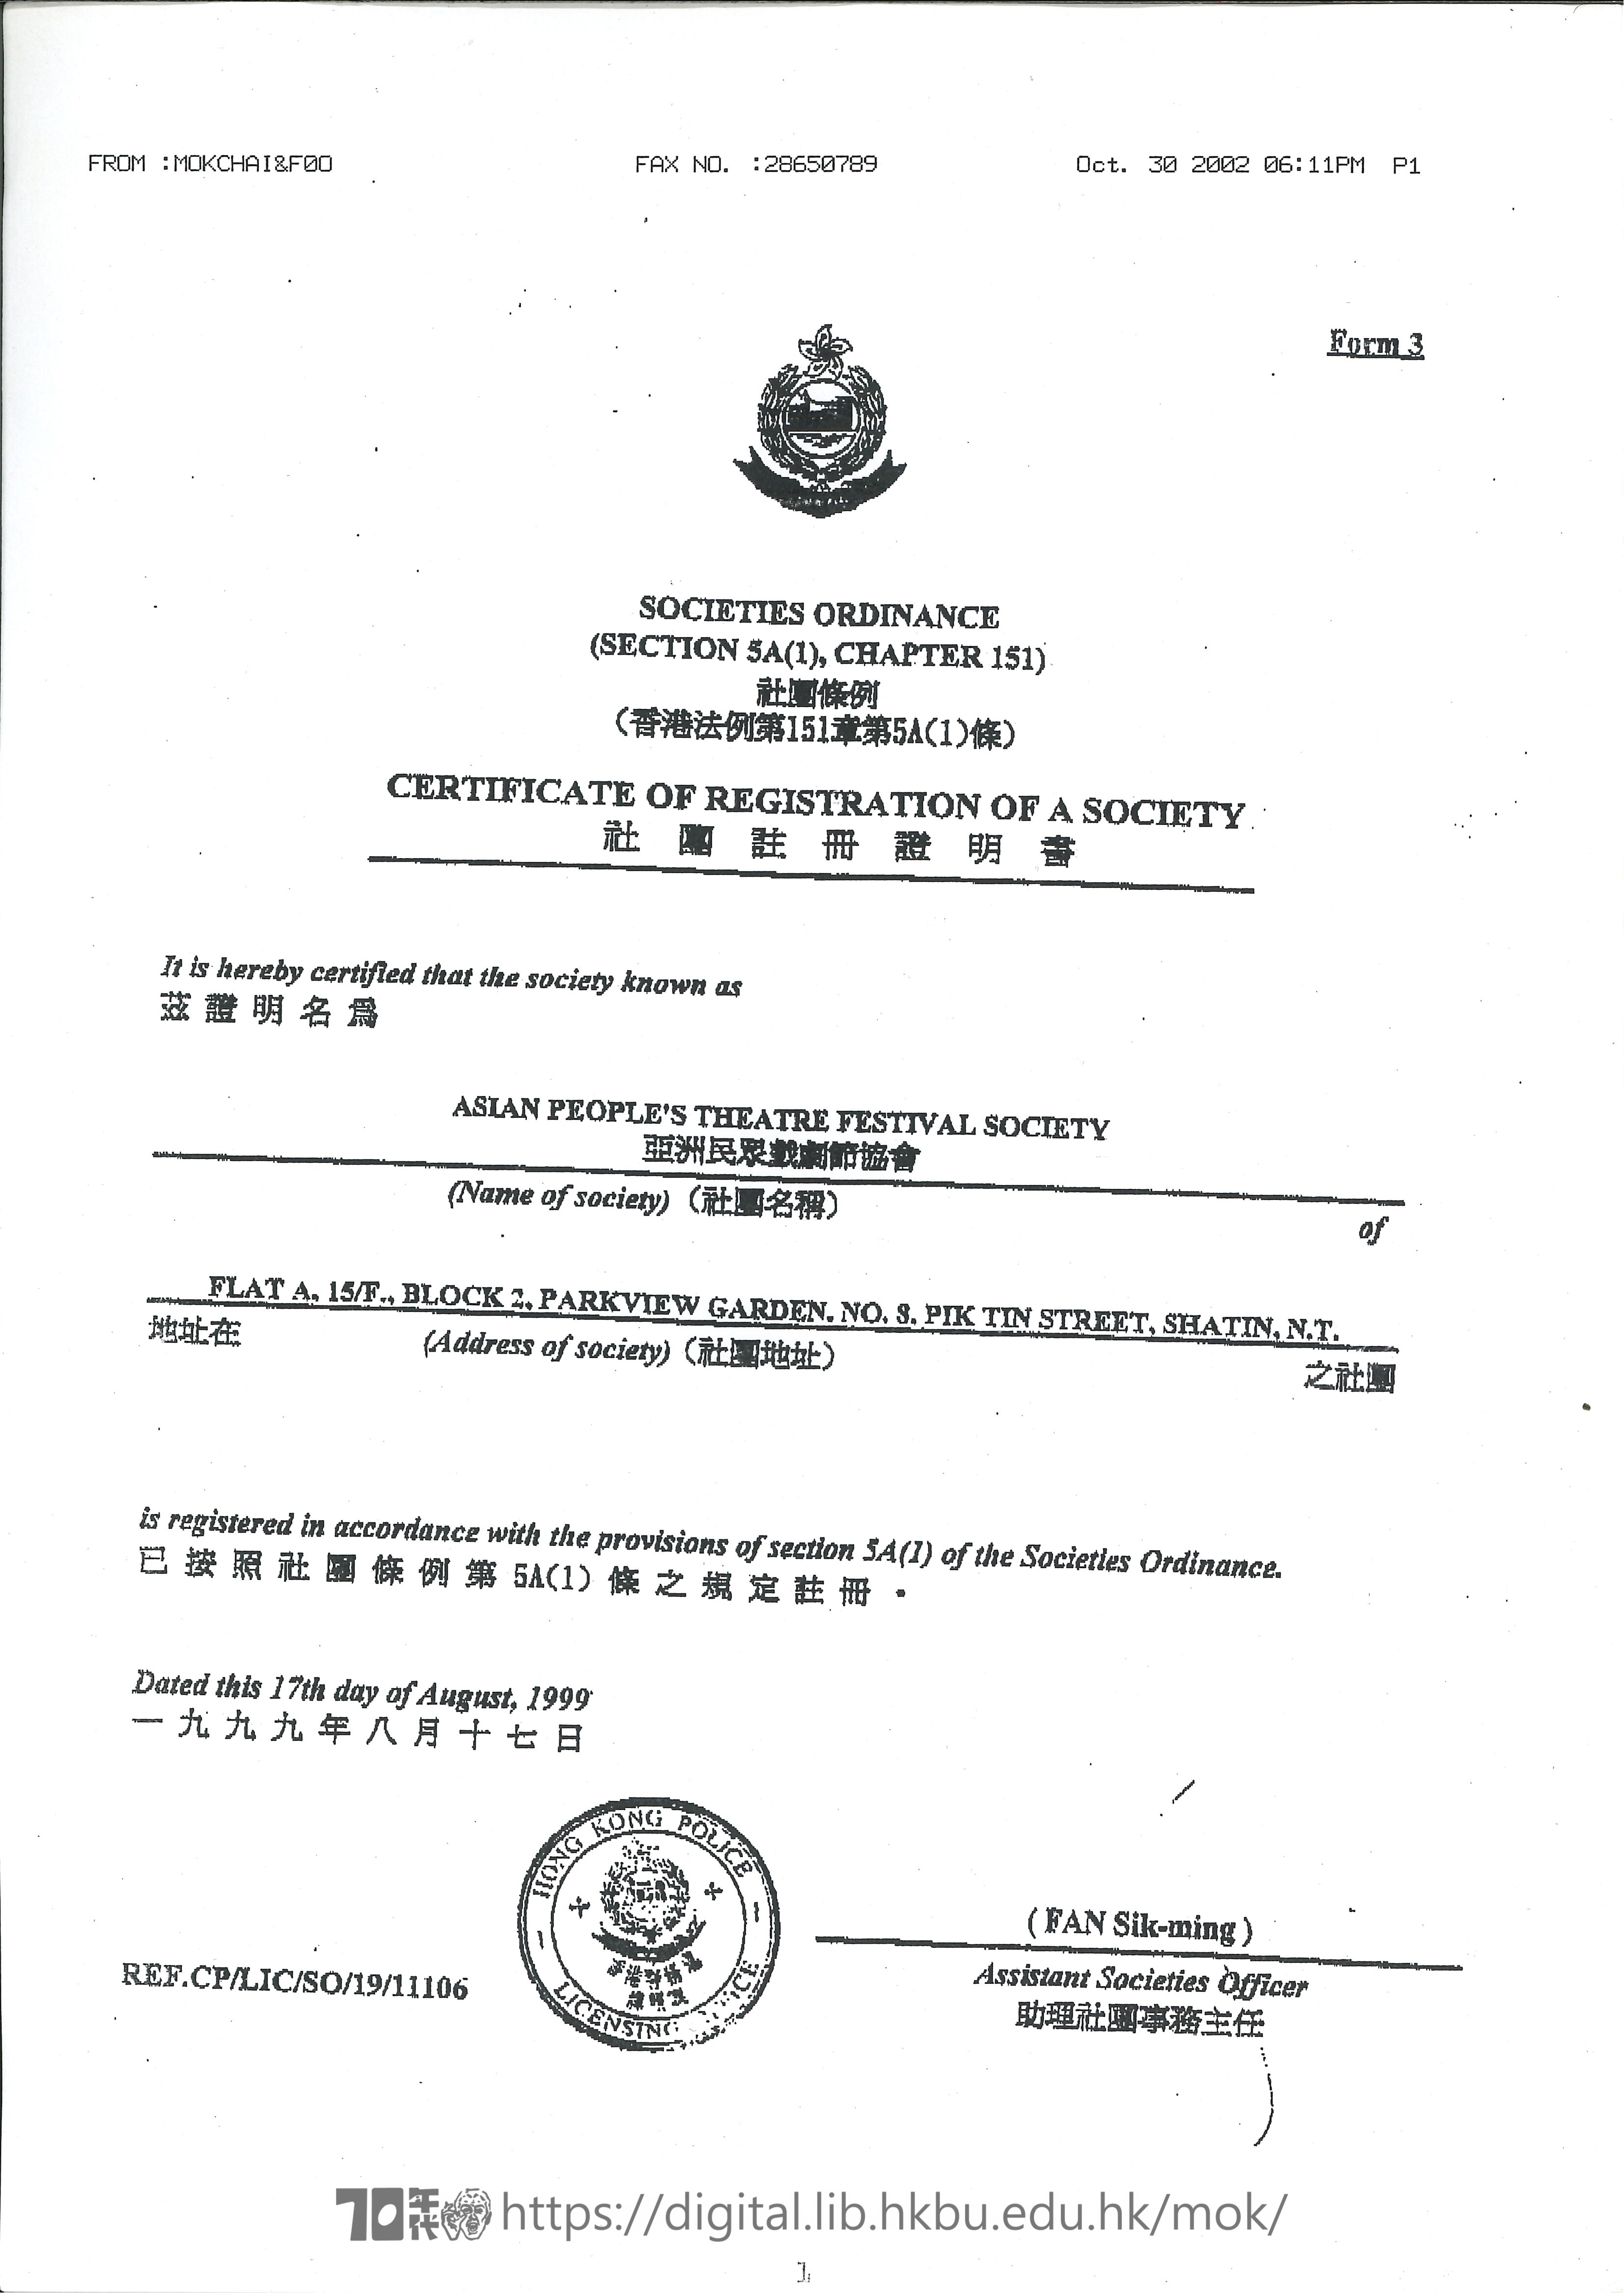   Certificate of Registration of Asian People